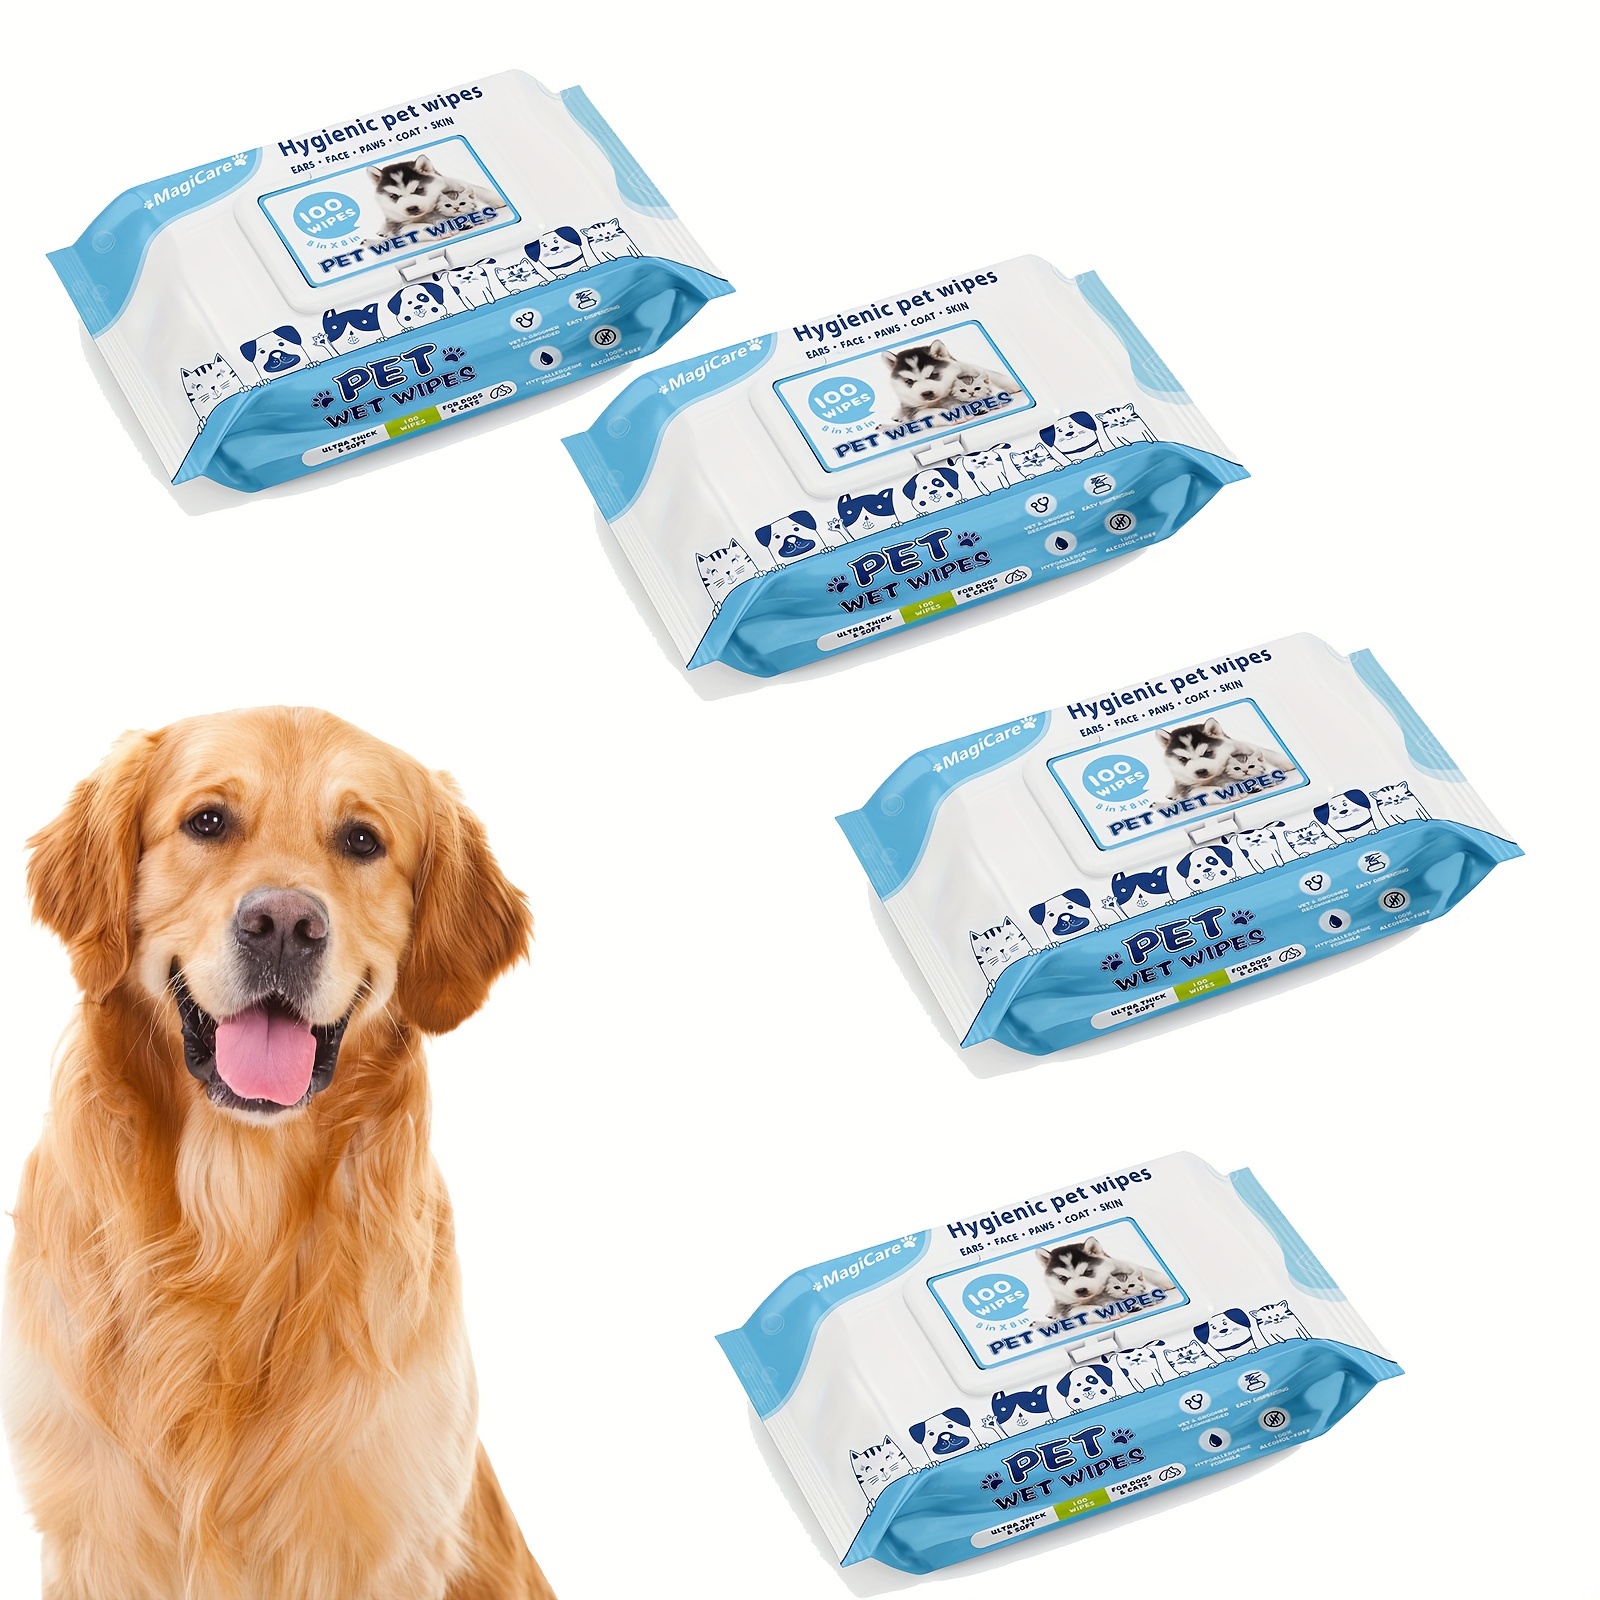 

1pack Pet Wipes 100 Pcs Dog Wipes - 8x8 Inch Unscented Dog Paw Cleaner Wipes For Body, Ears, Face, And Skin Ultra Thick And Soft With Hypoallergenic Formula Ideal Pet Wipes For Dogs & Cats